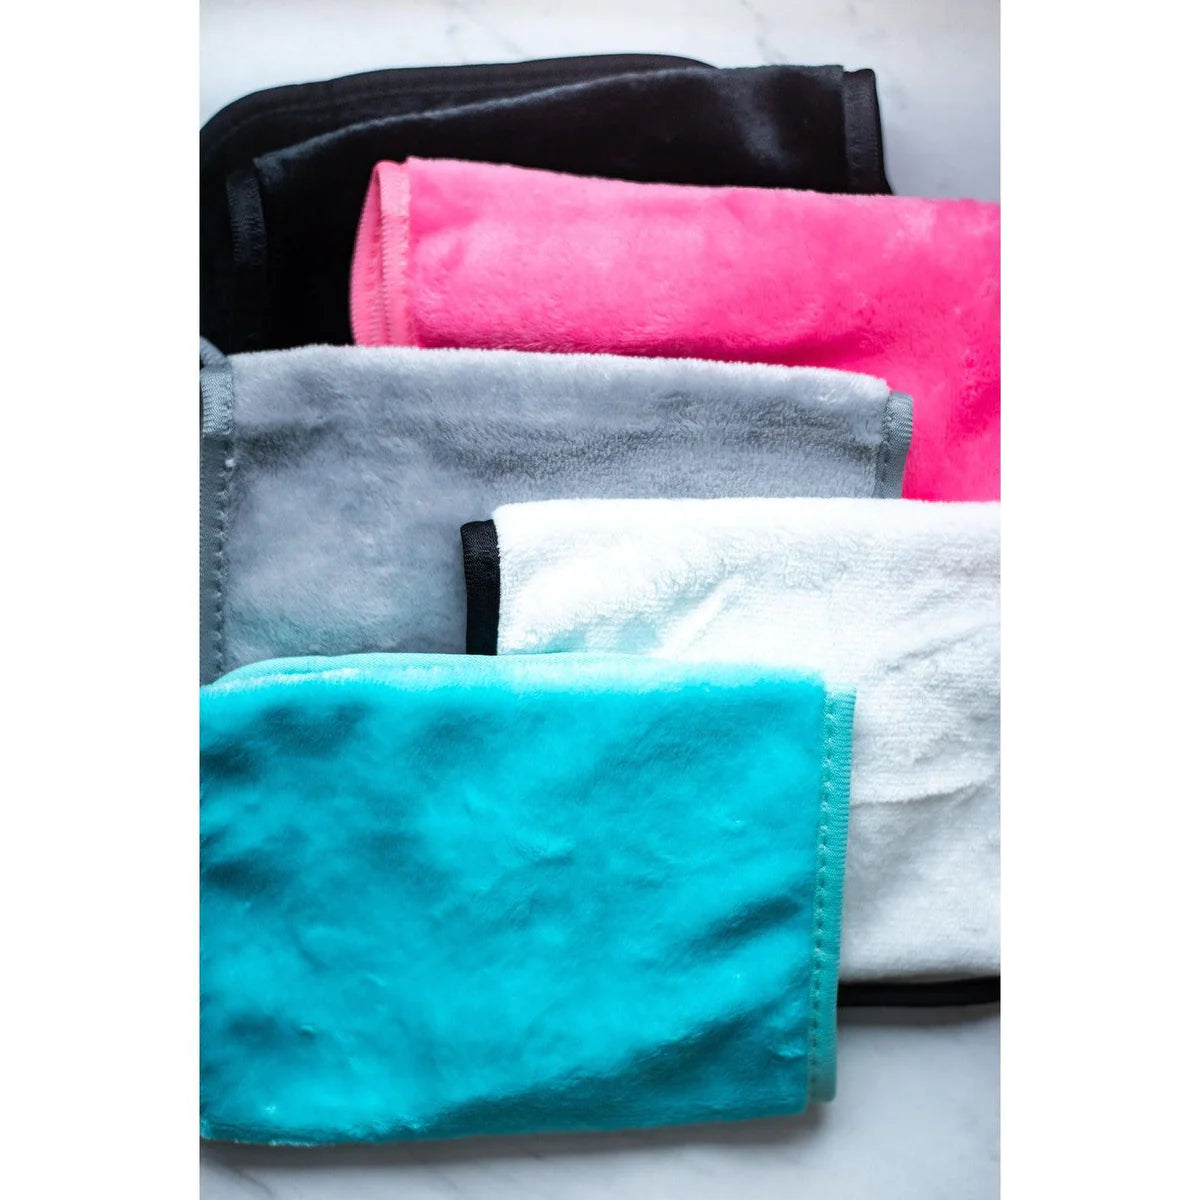 Wash the Day Away- Makeup Remover Cloths